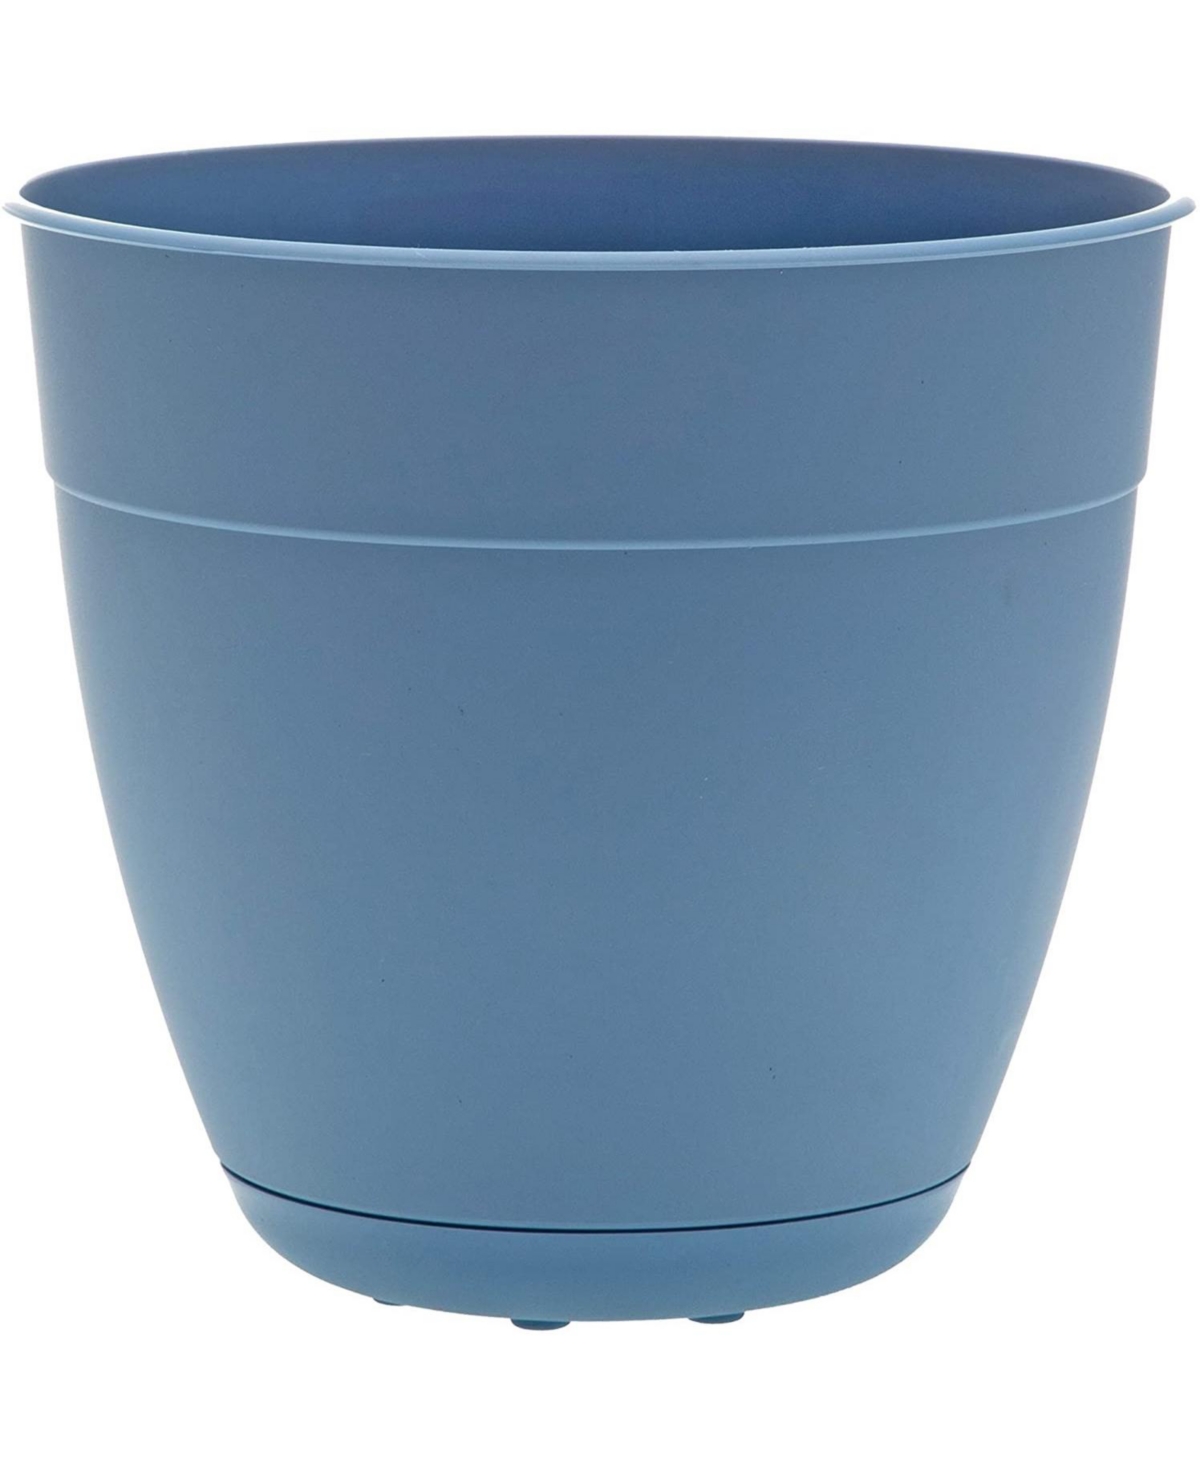 Dayton Recycled Ocean Plastic Planter w/ Saucer , Ocean Blue, 8 inches - Blue